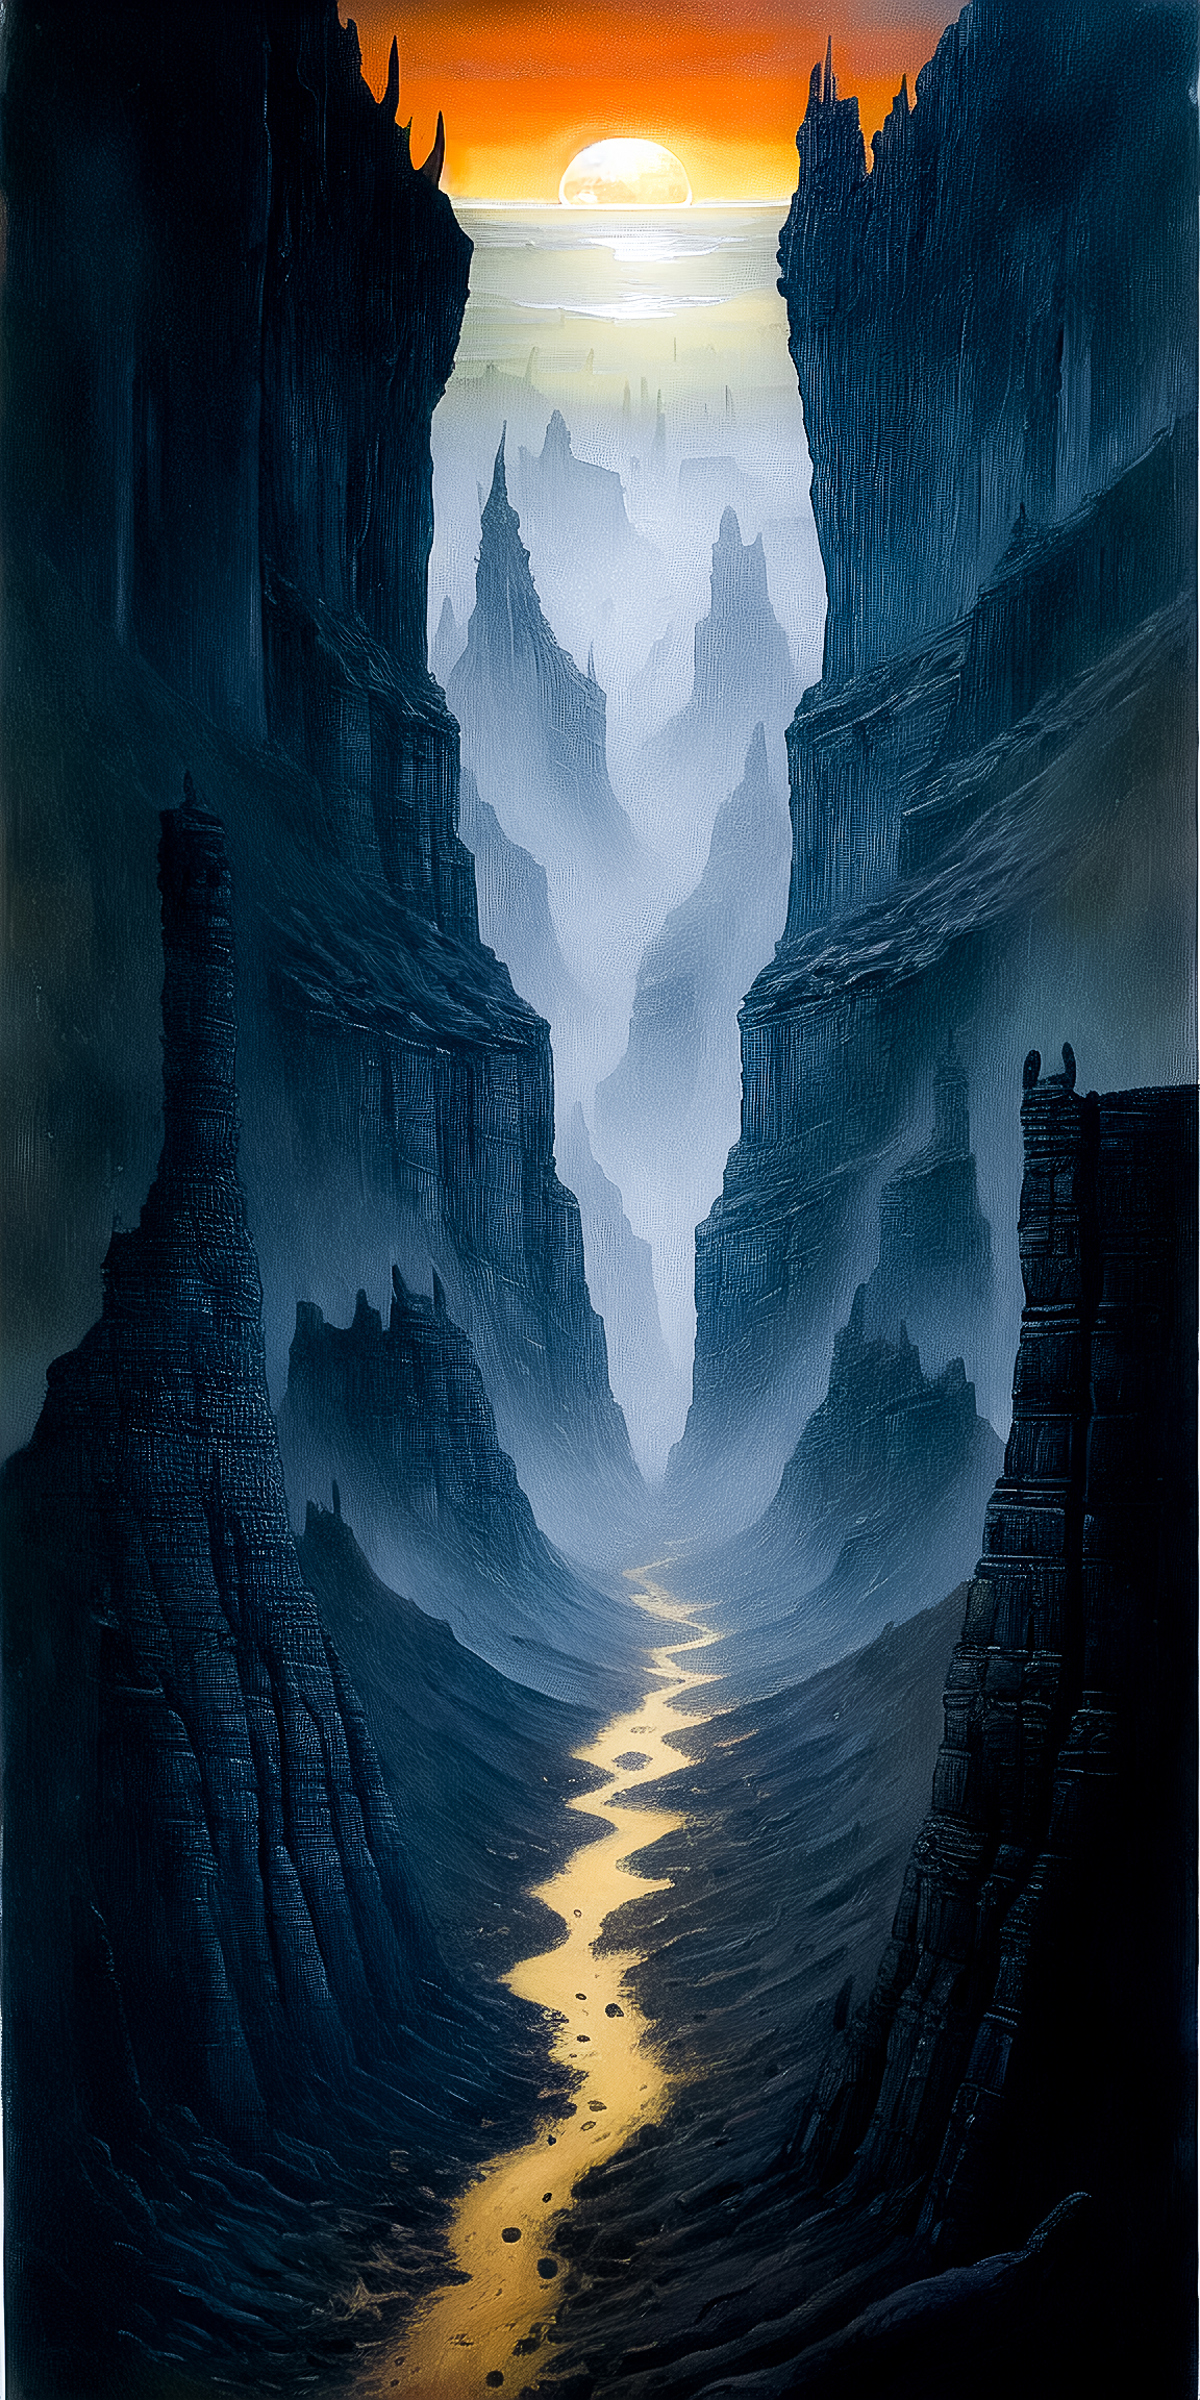 A beautiful painting of a mountain range with a shining pathway in the middle.